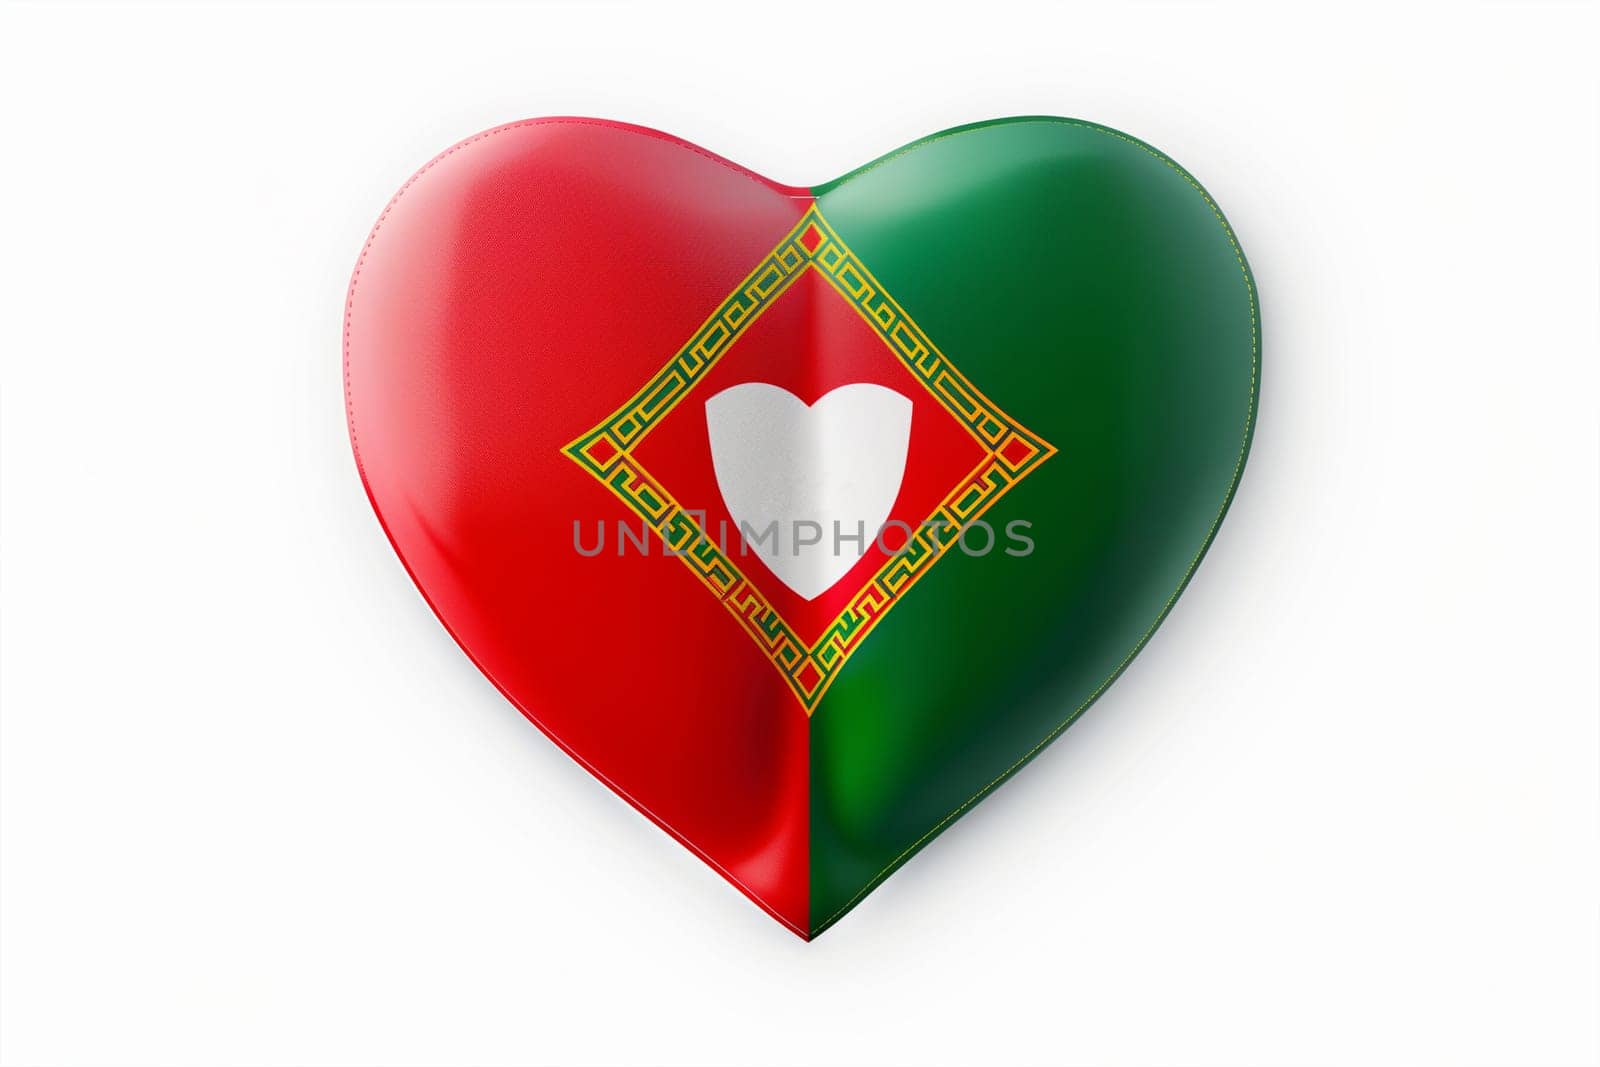 A heart shaped object with a flag of Portugal on it, symbolizing Portugal Day celebrations.